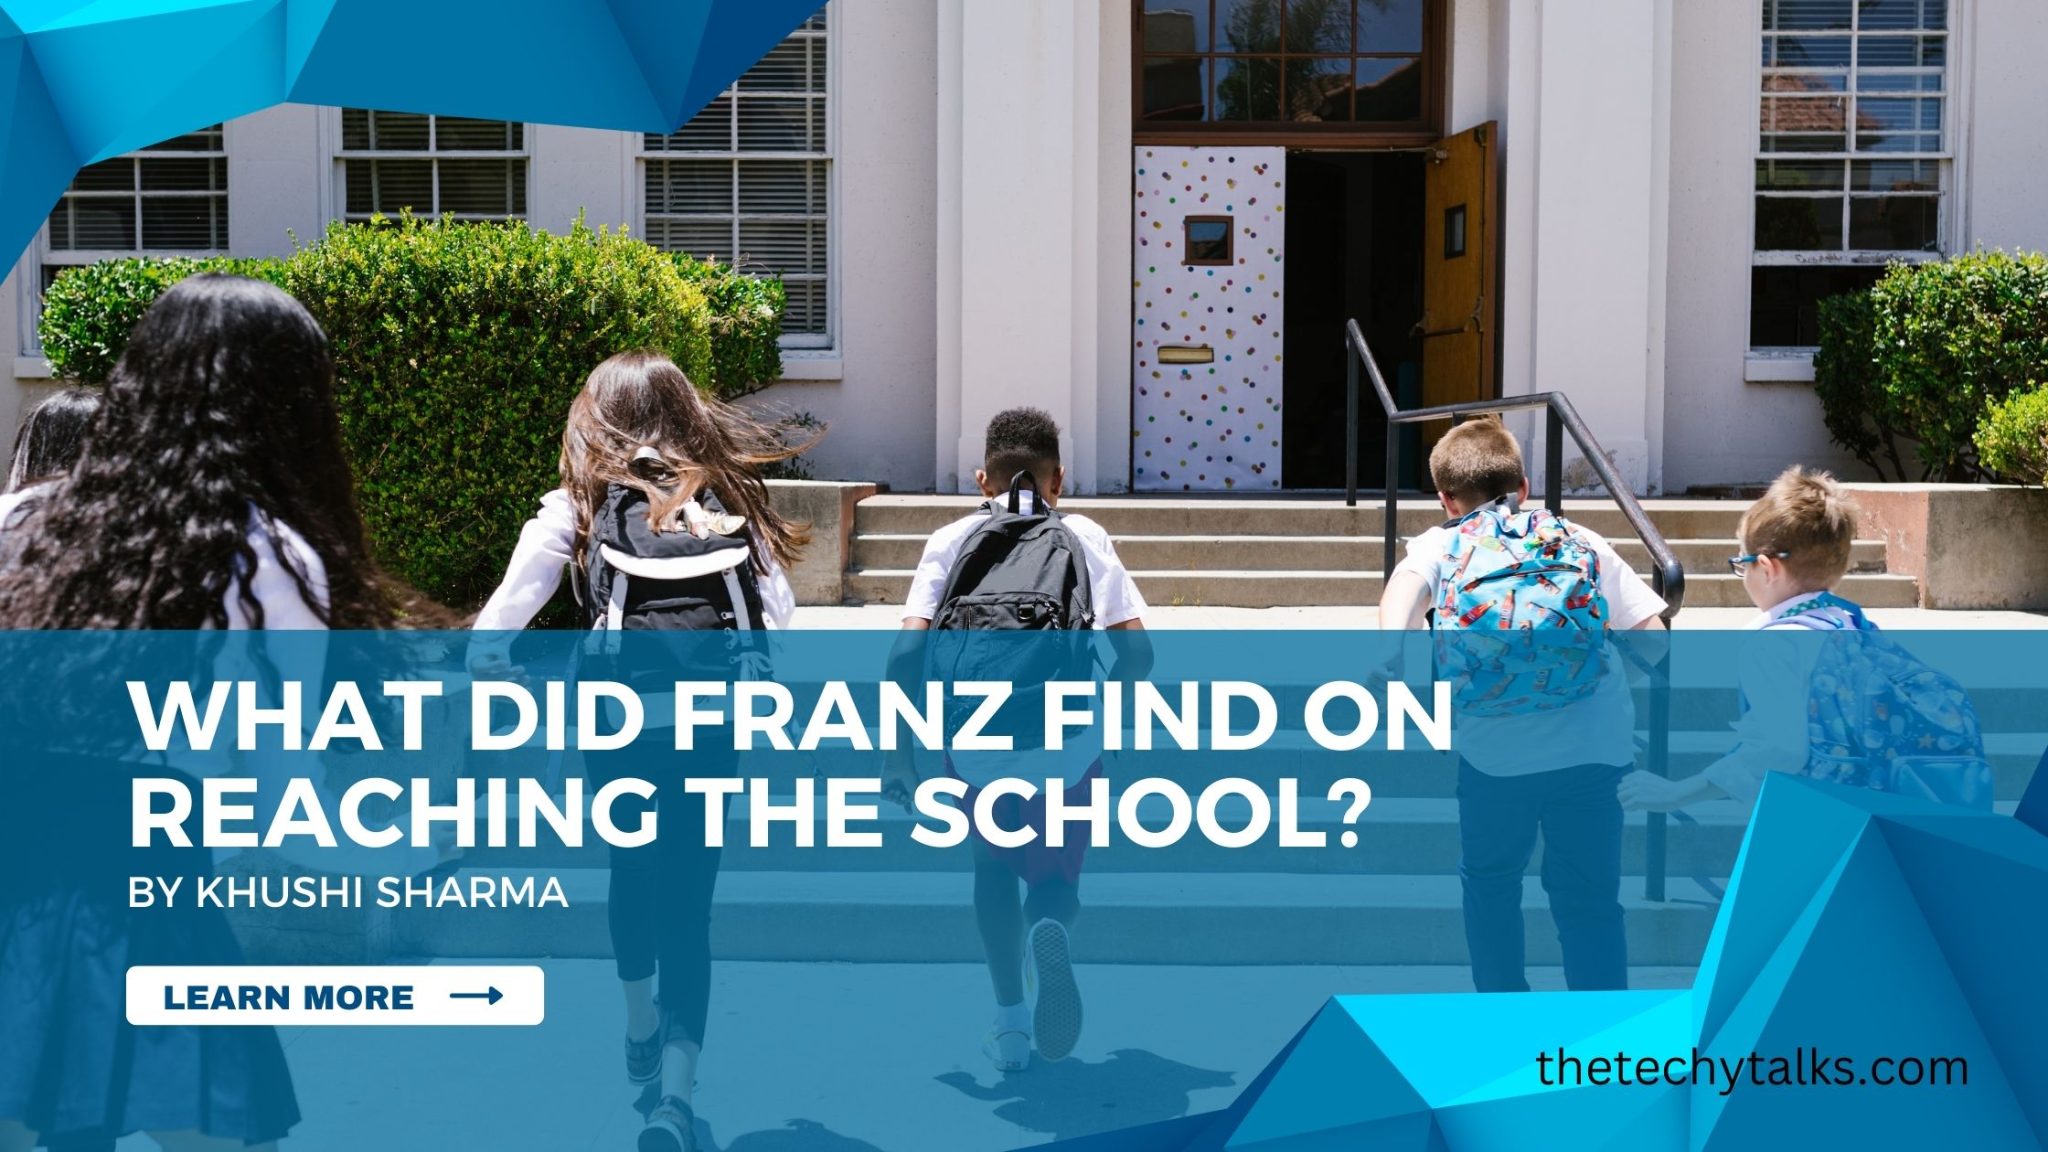 What did Franz find on reaching the school?